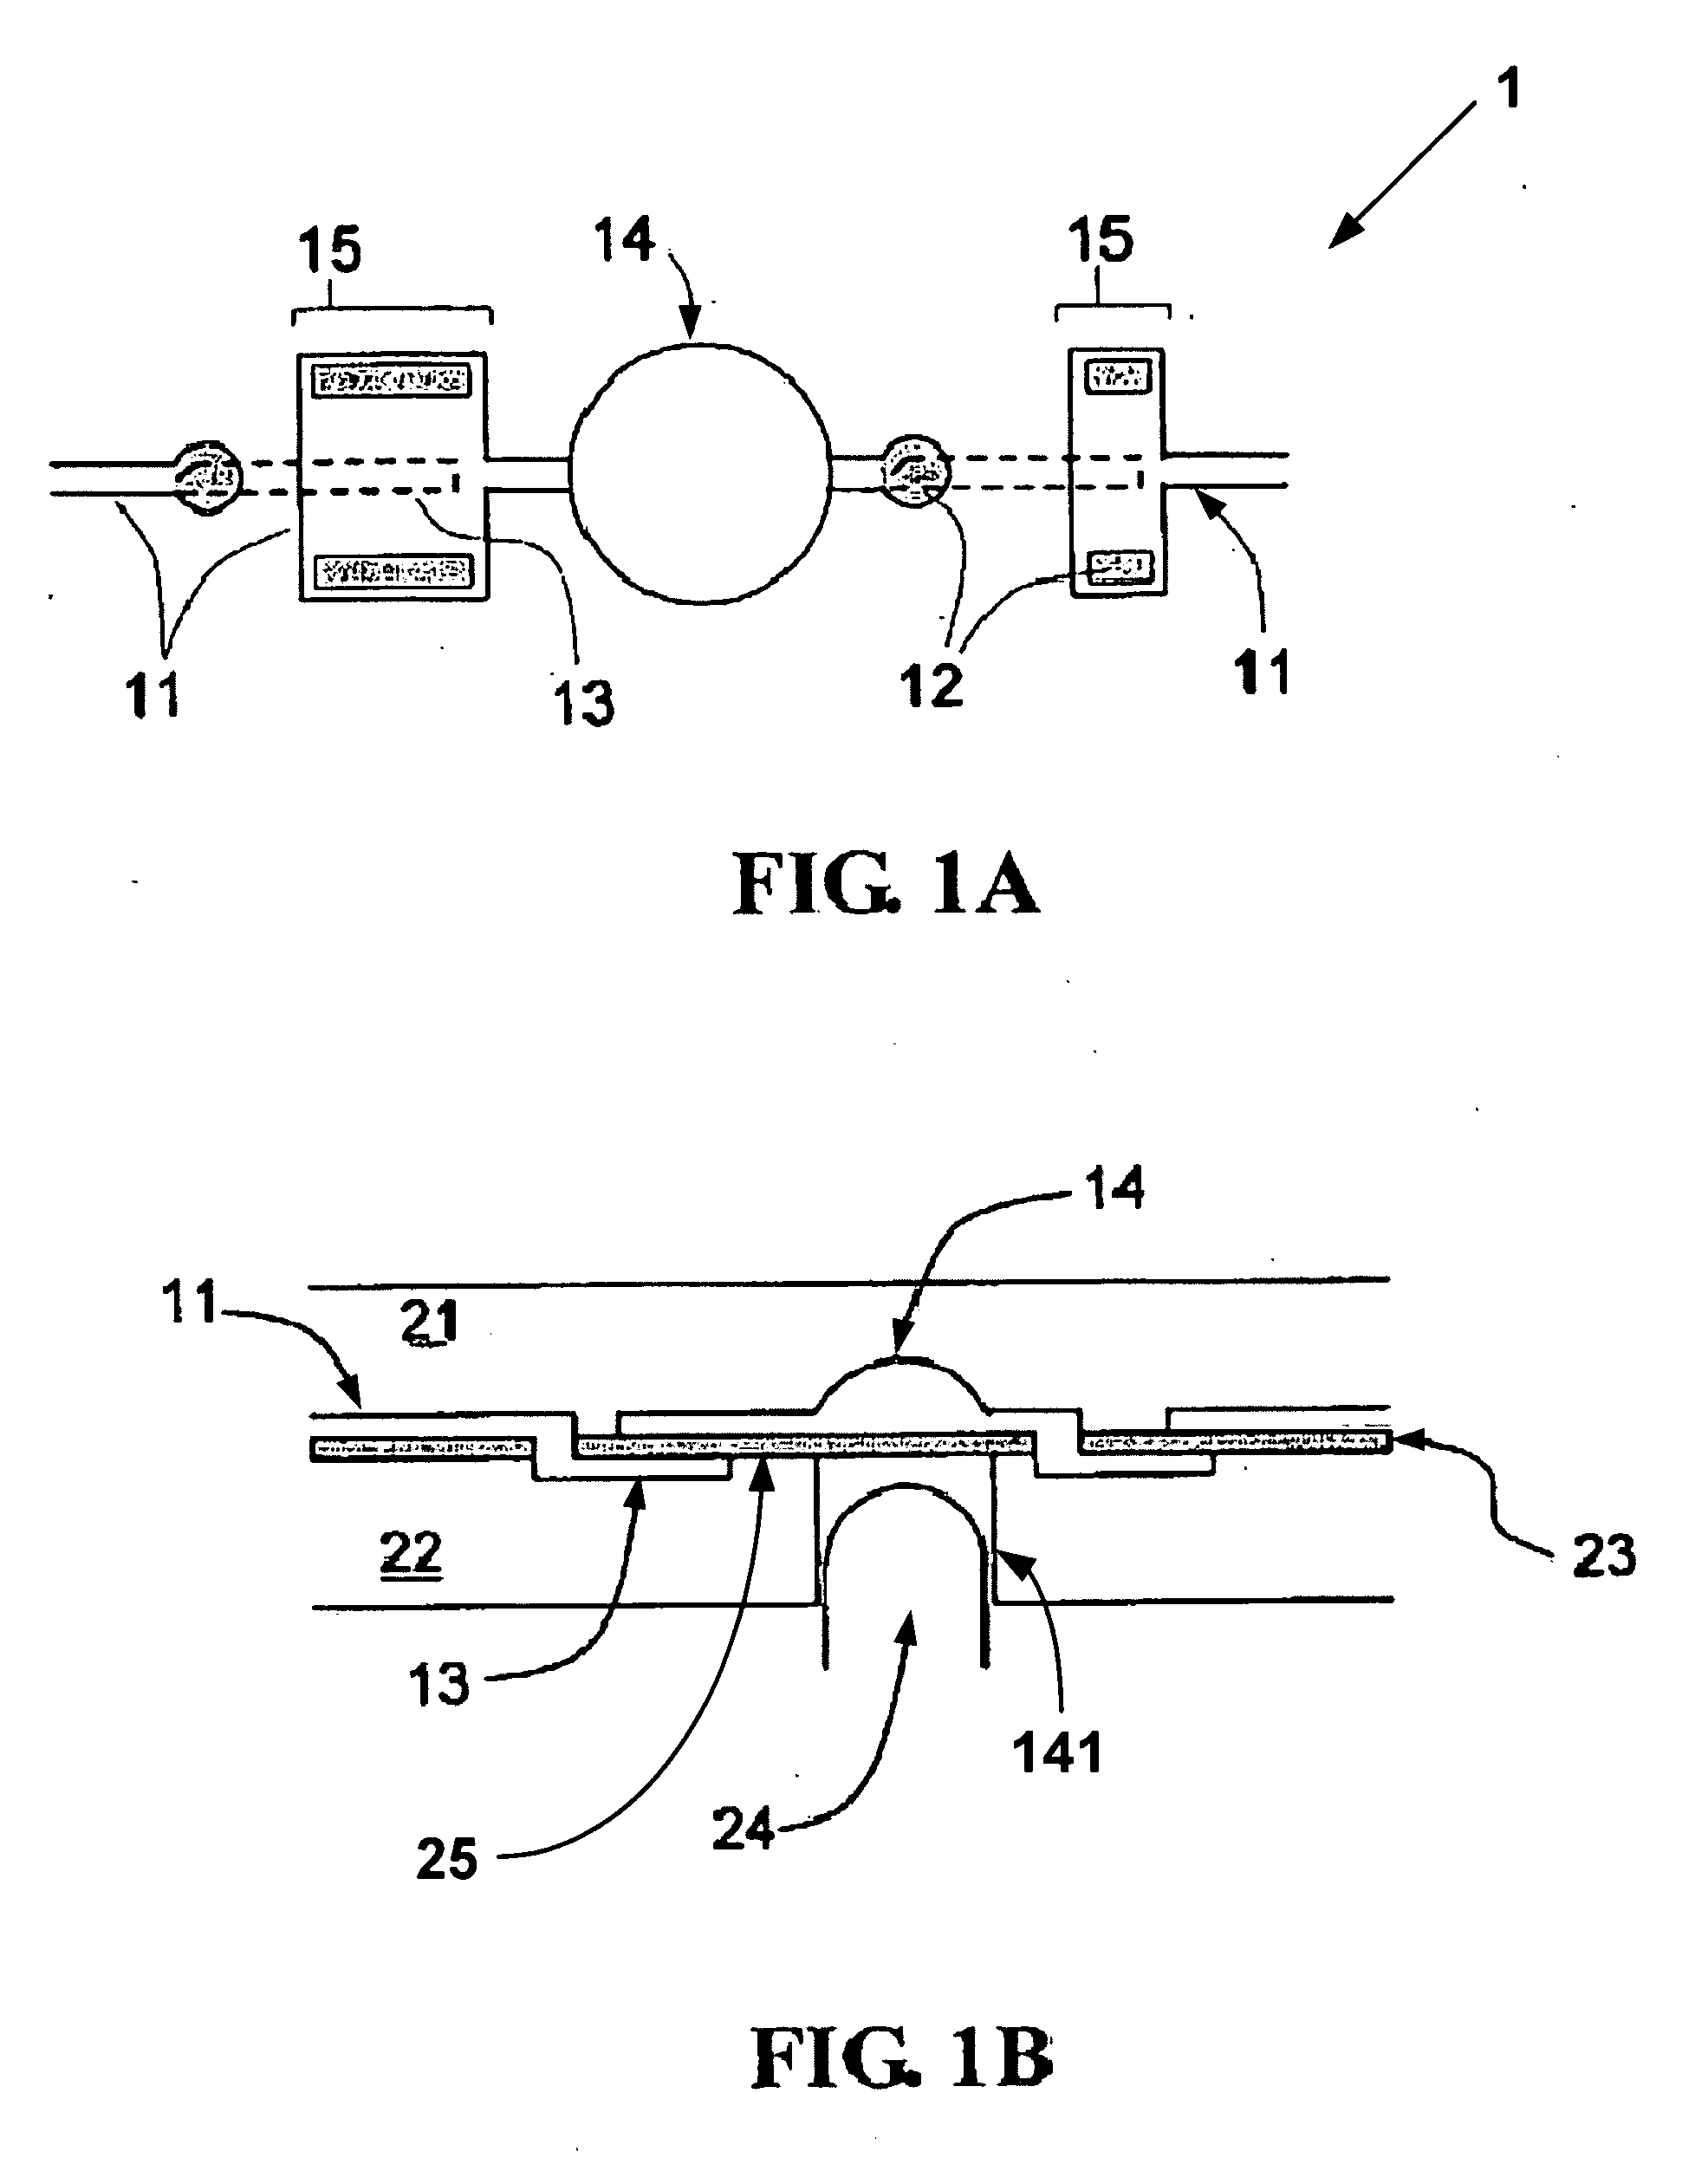 Miniaturized fluid delivery and analysis system